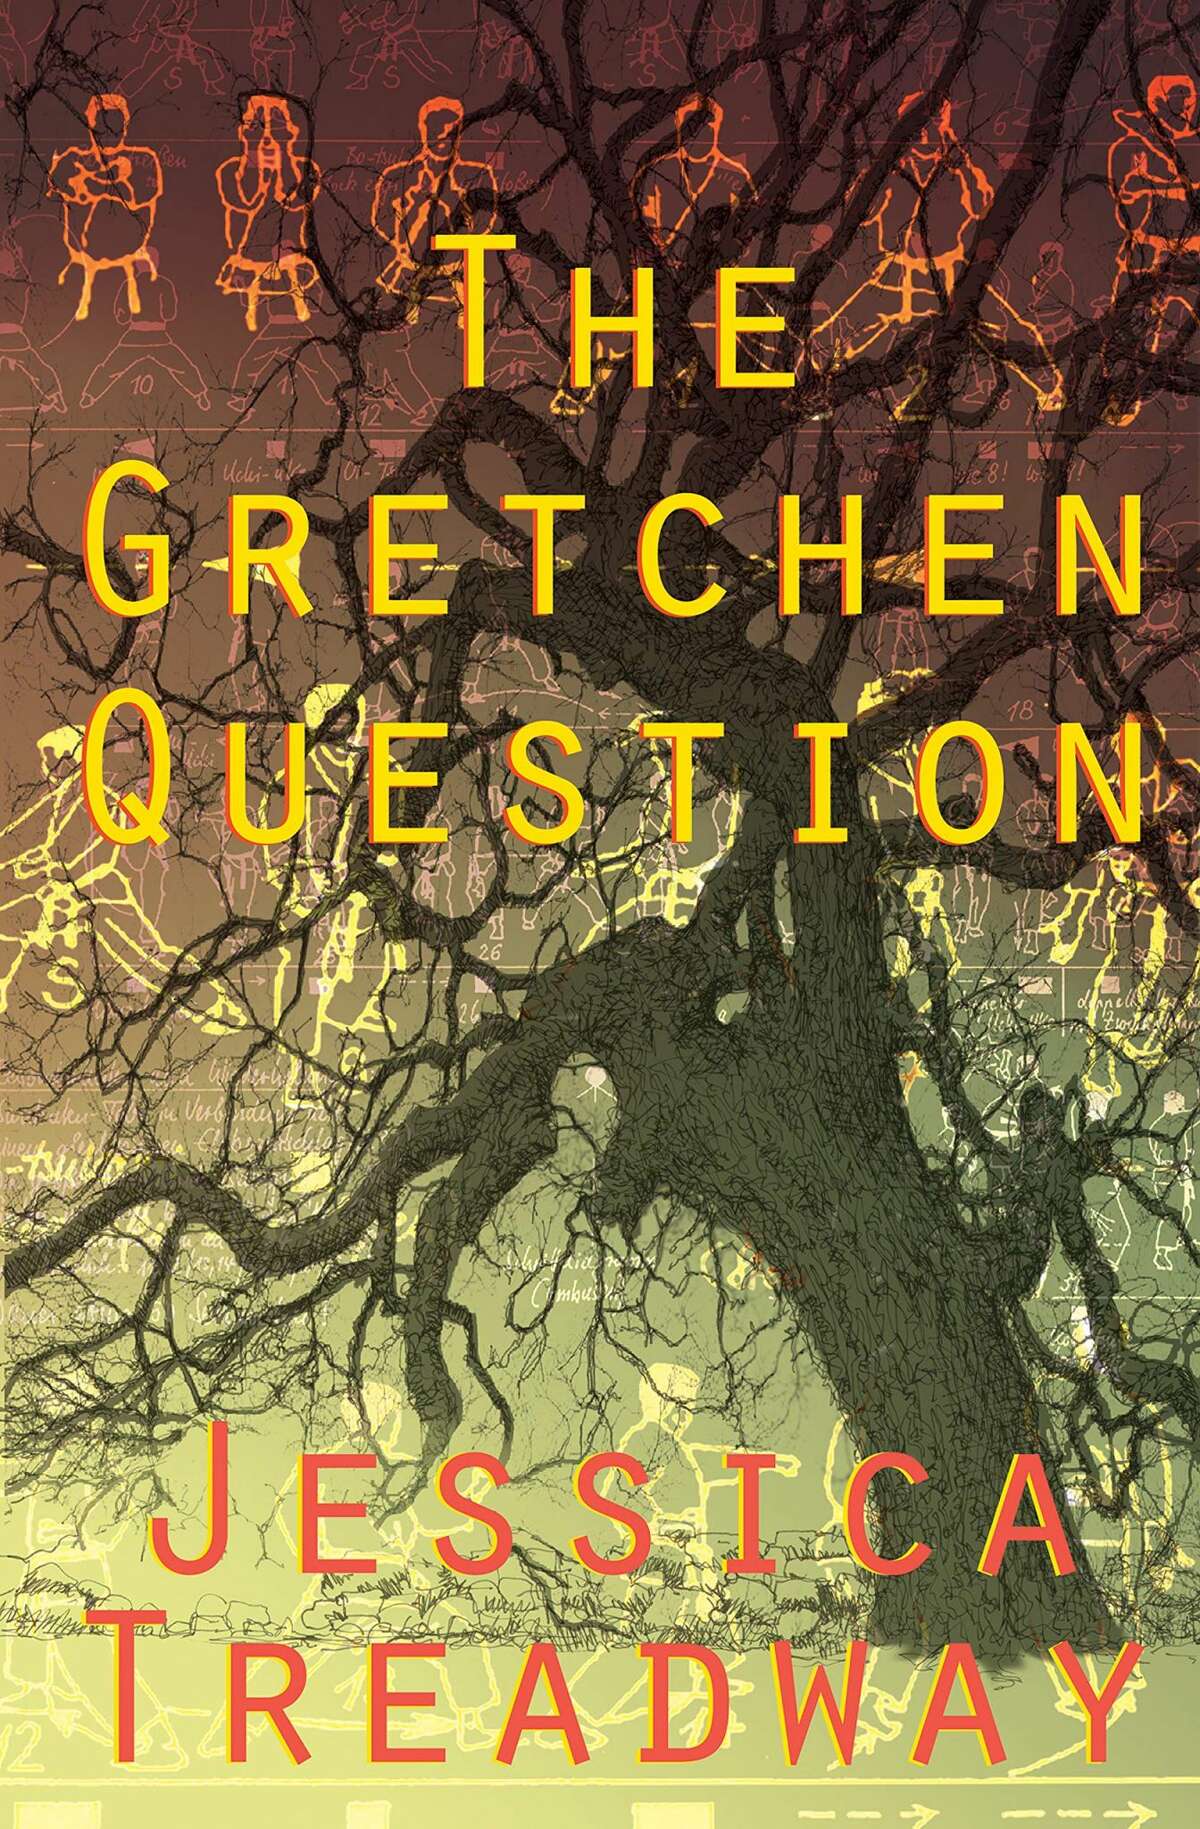 “The Gretchen Question” by Jessica Treadway